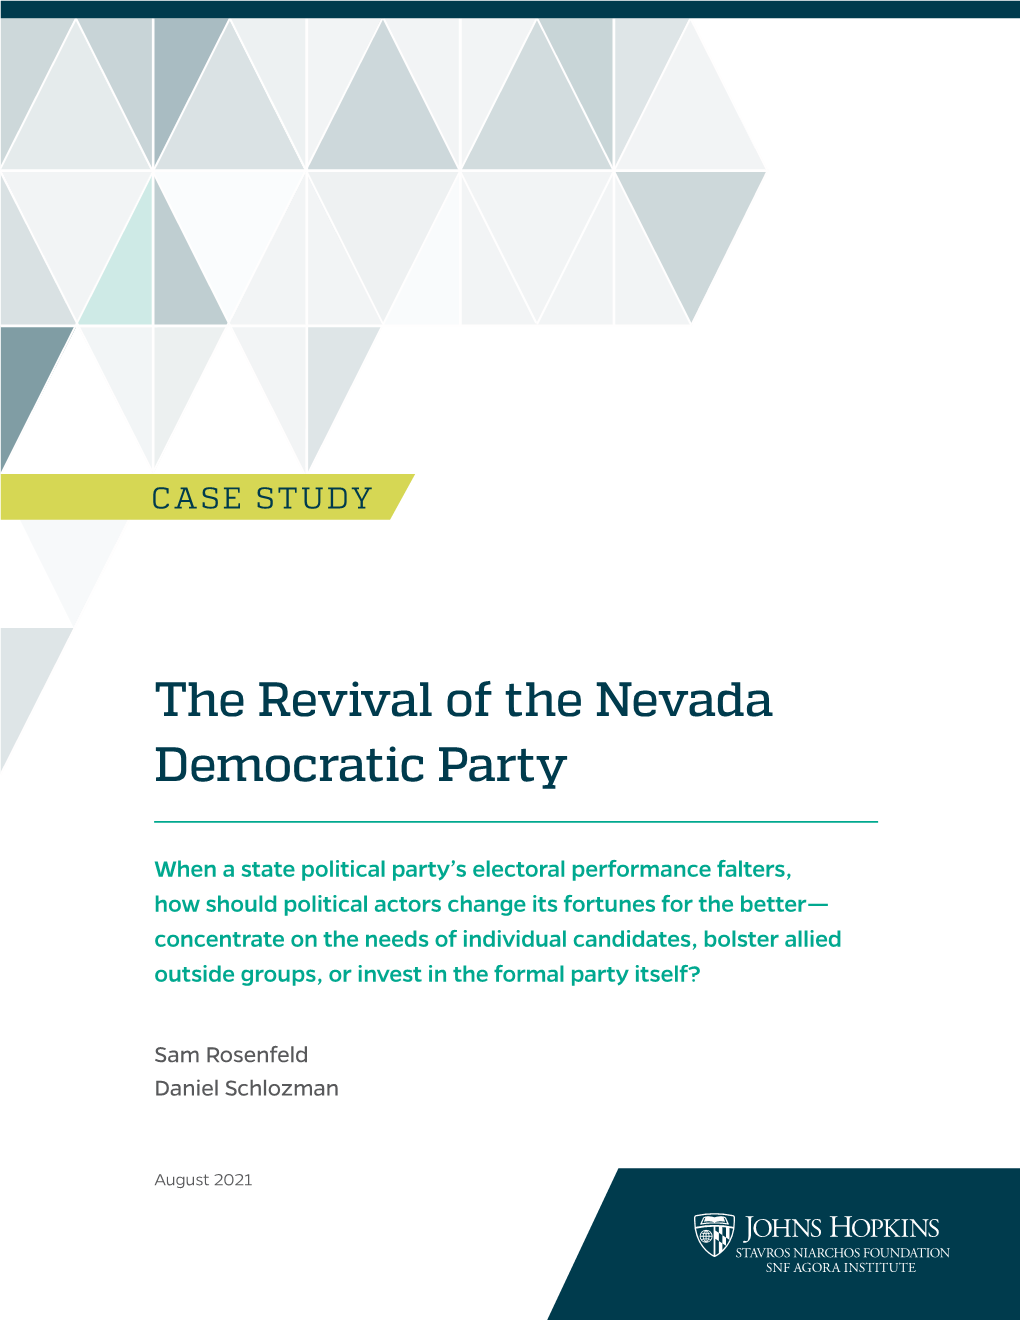 The Revival of the Nevada Democratic Party